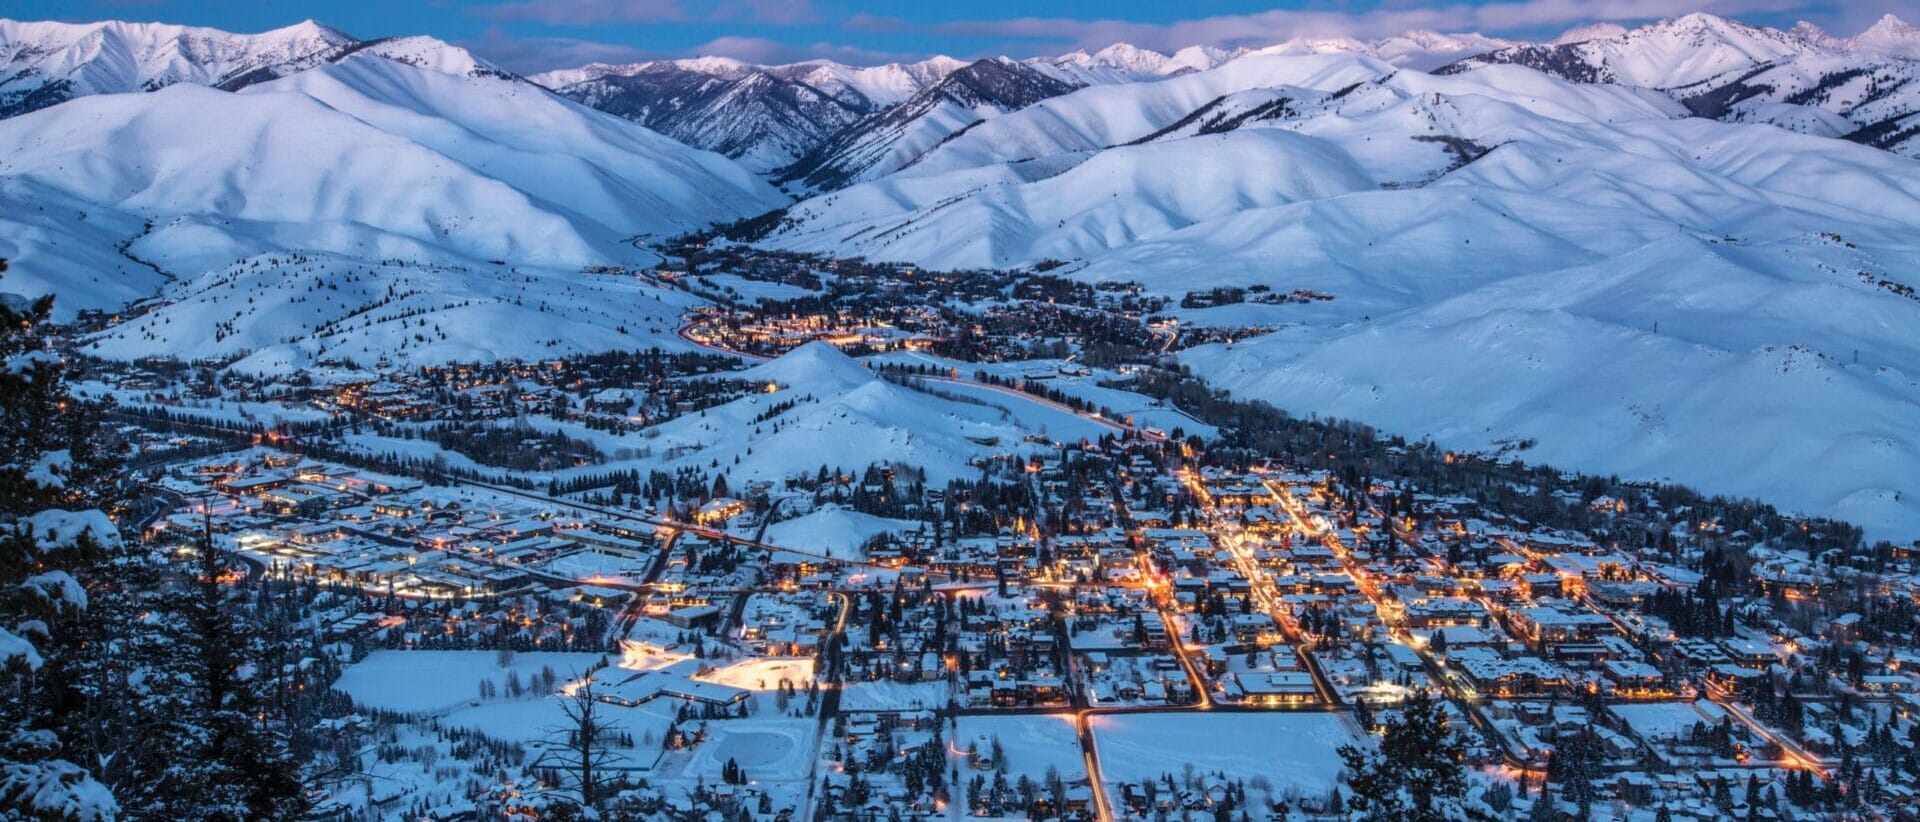 Aerial view of a snow-covered mountain town illuminated at dusk, with surrounding peaks under a twilight sky. For more information, contact us.